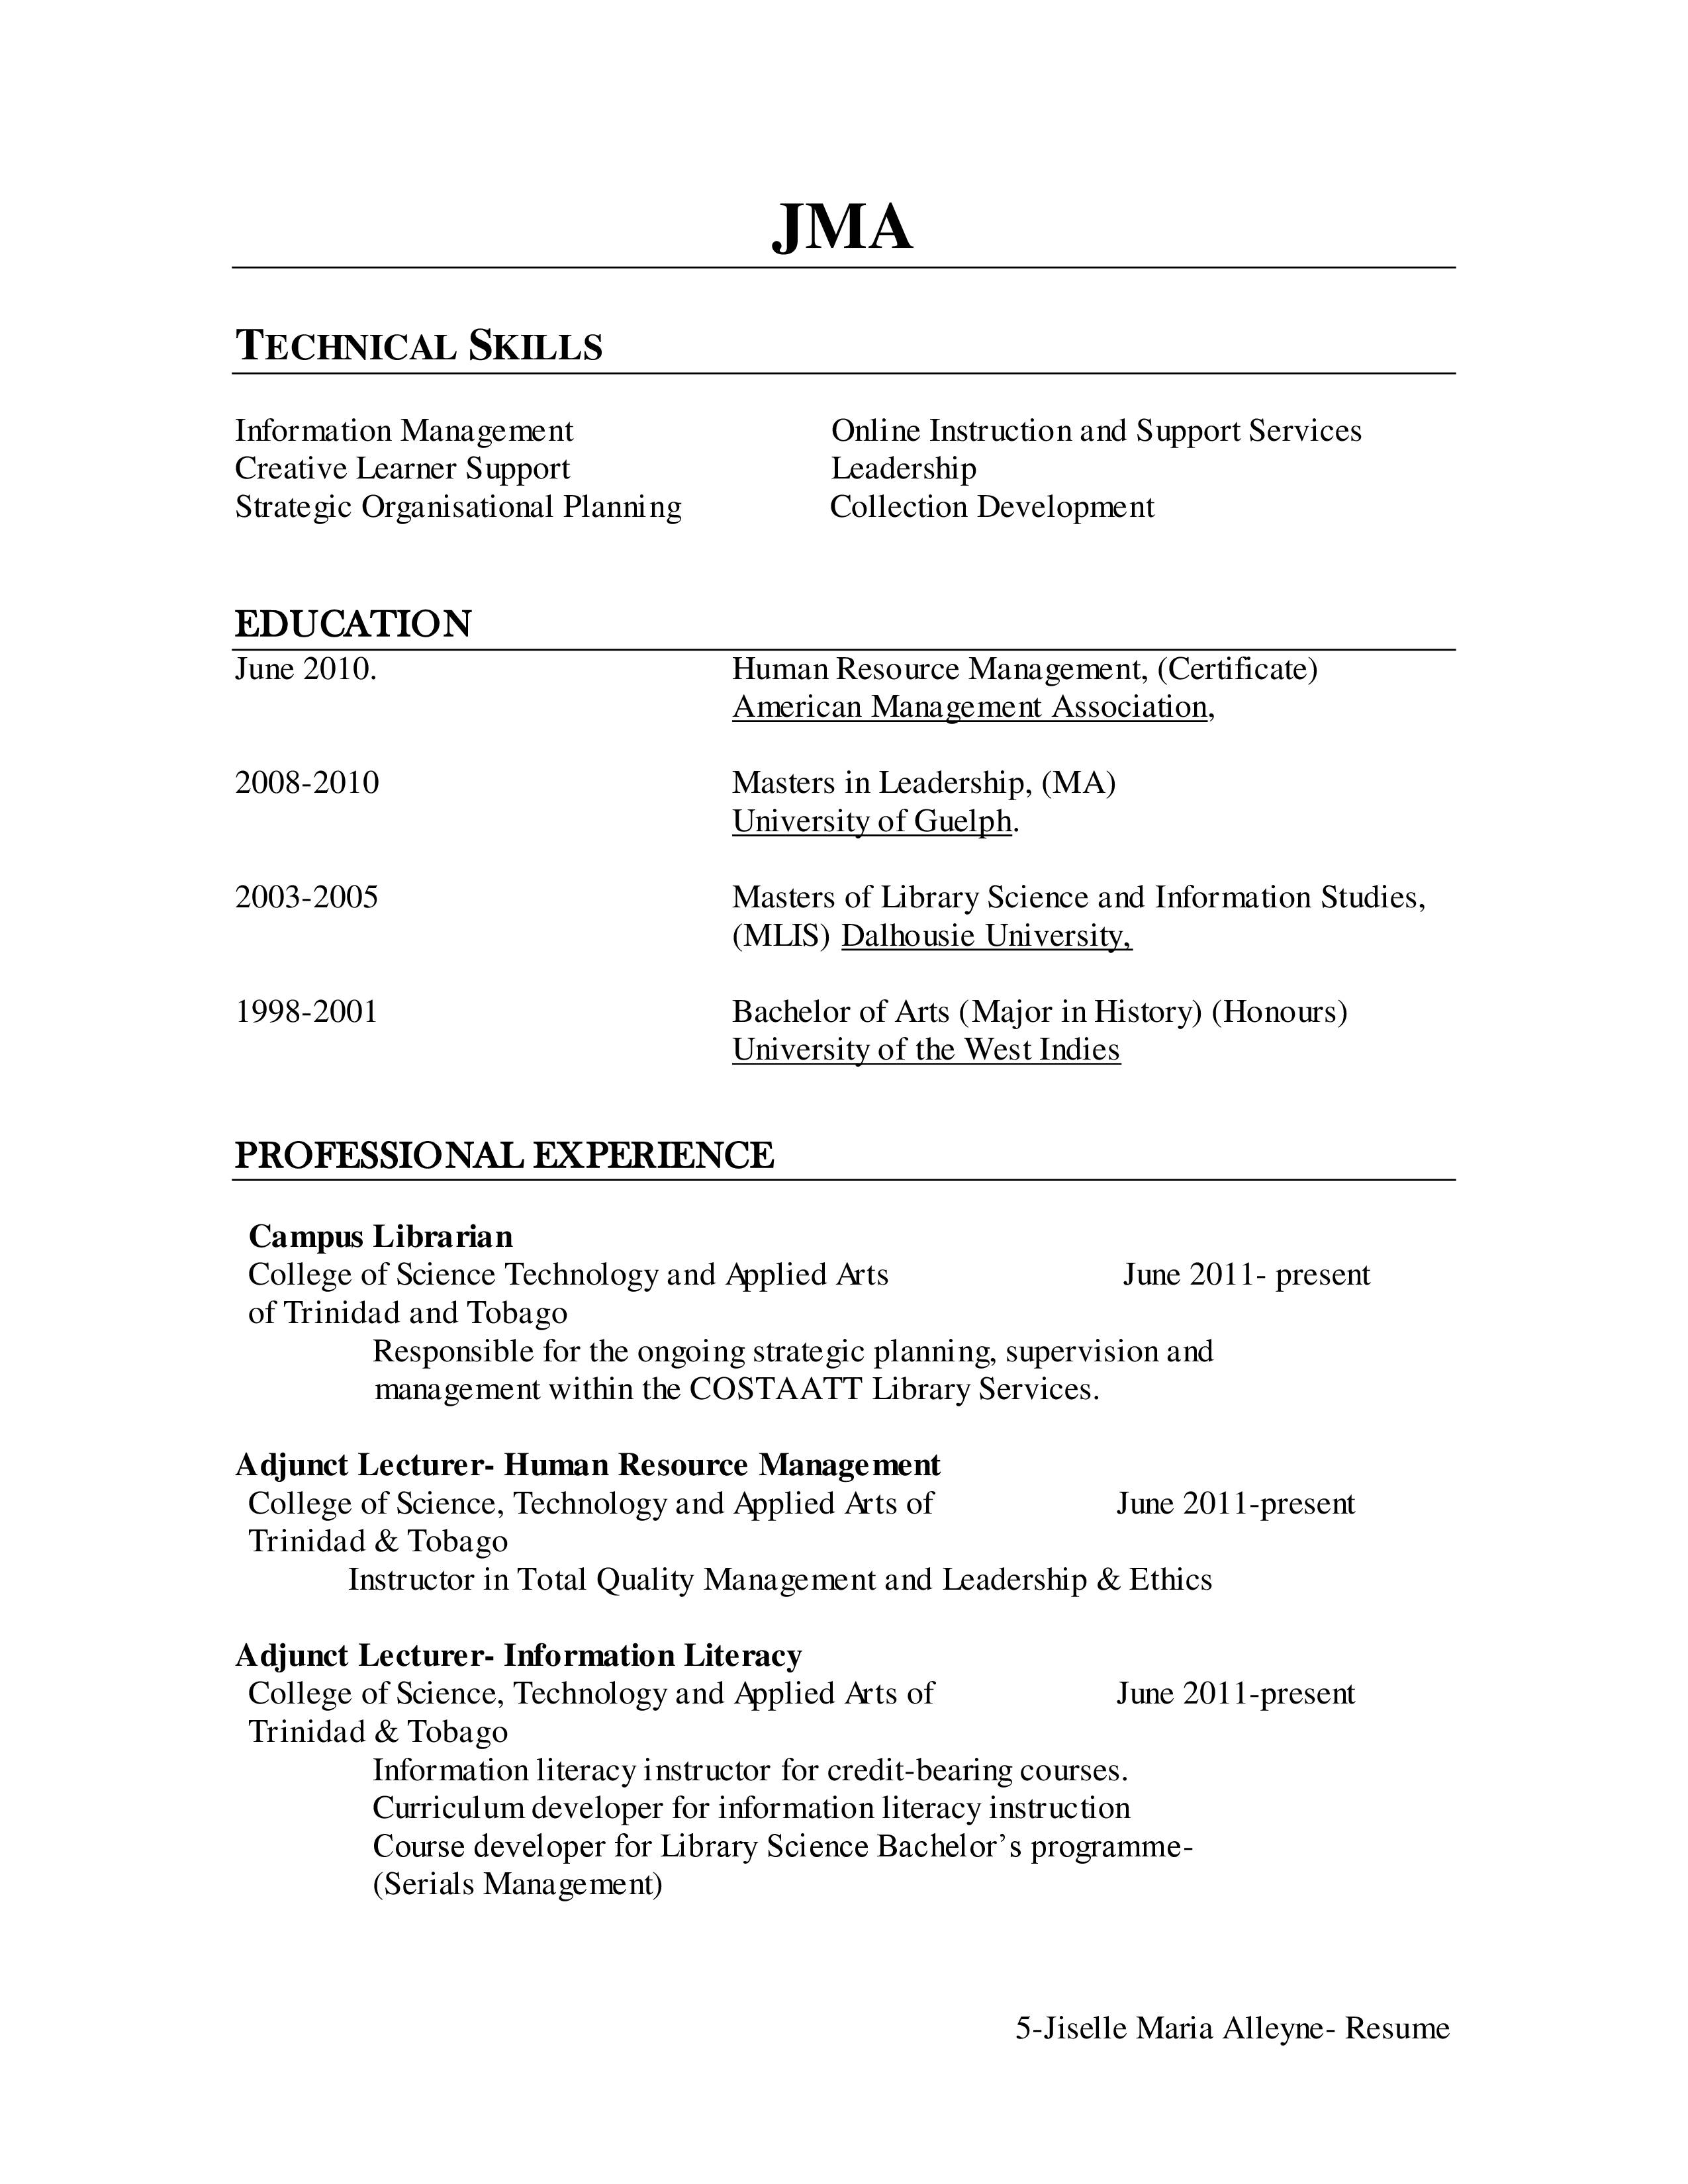 Resume library science